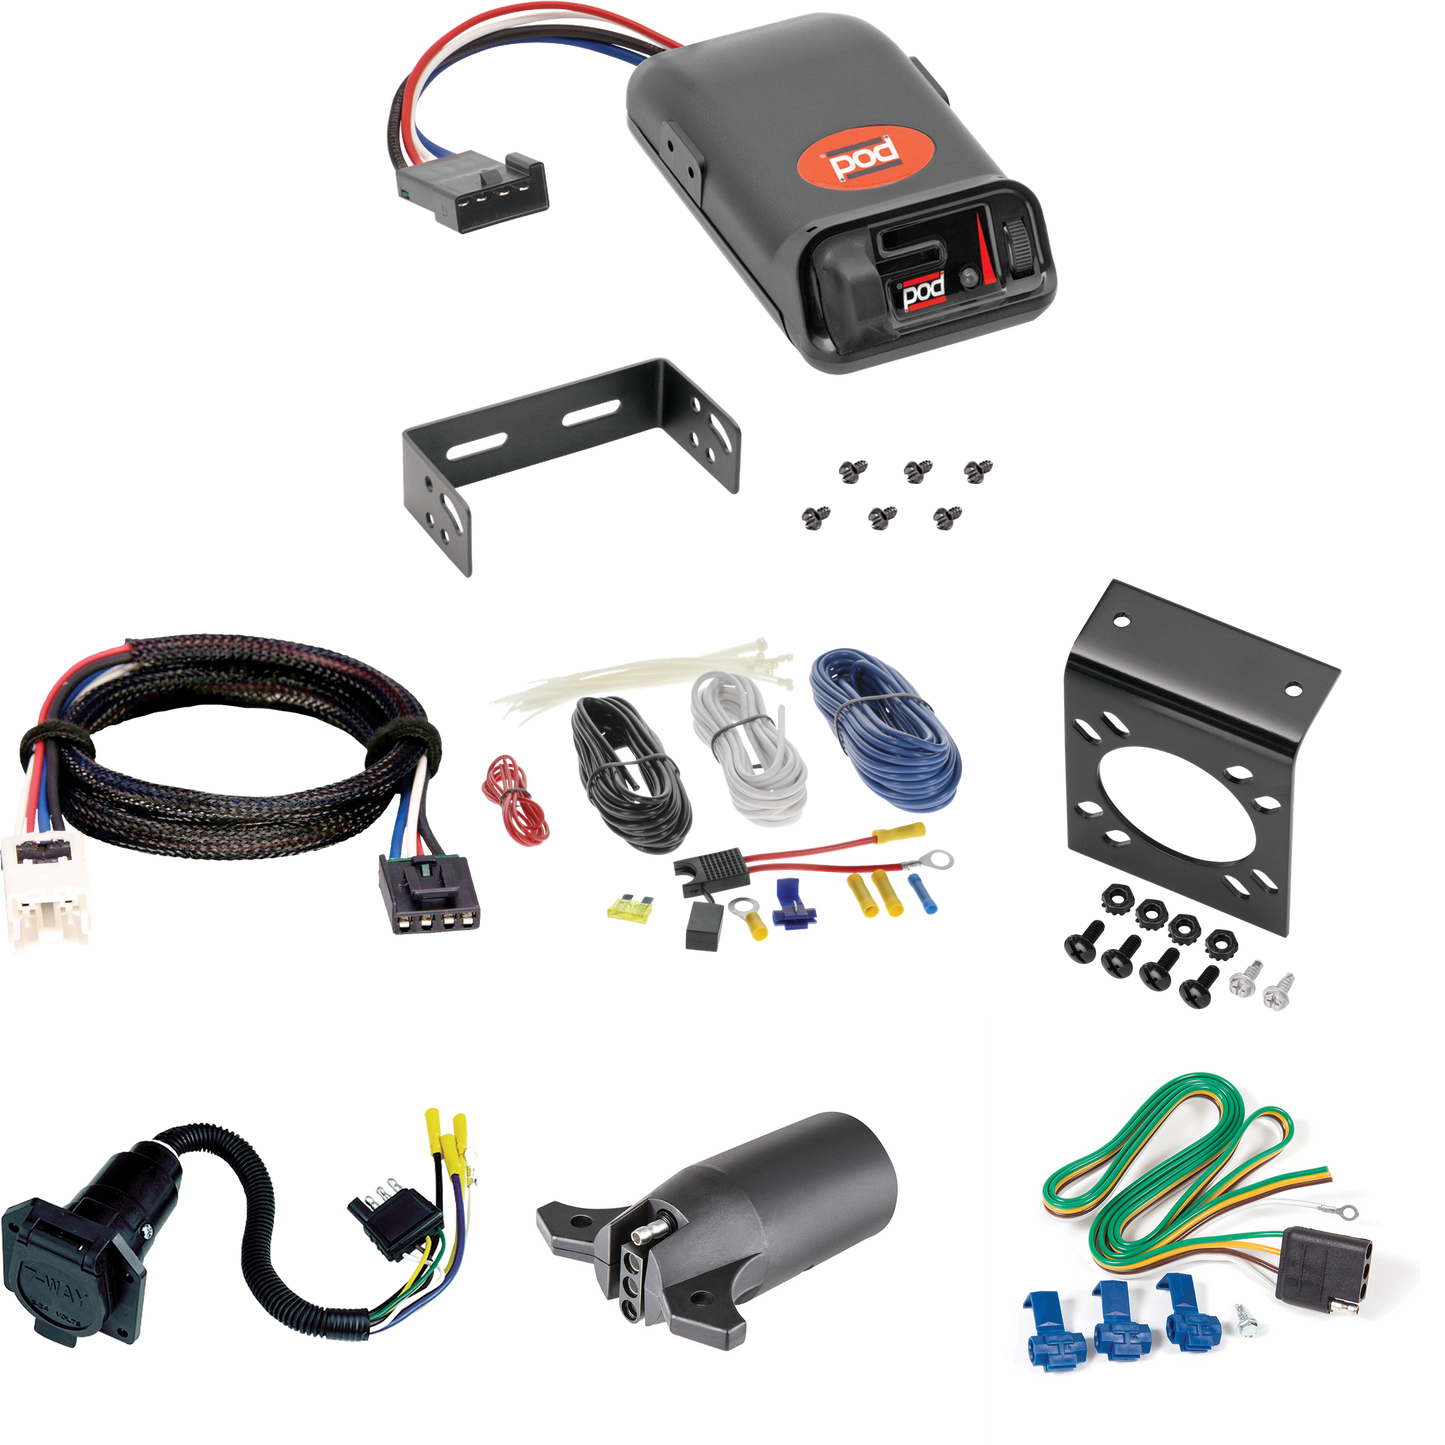 Fits 2004-2015 Nissan Titan 7-Way RV Wiring + Pro Series POD Brake Control + Plug & Play BC Adapter + 7-Way to 4-Way Adapter By Reese Towpower